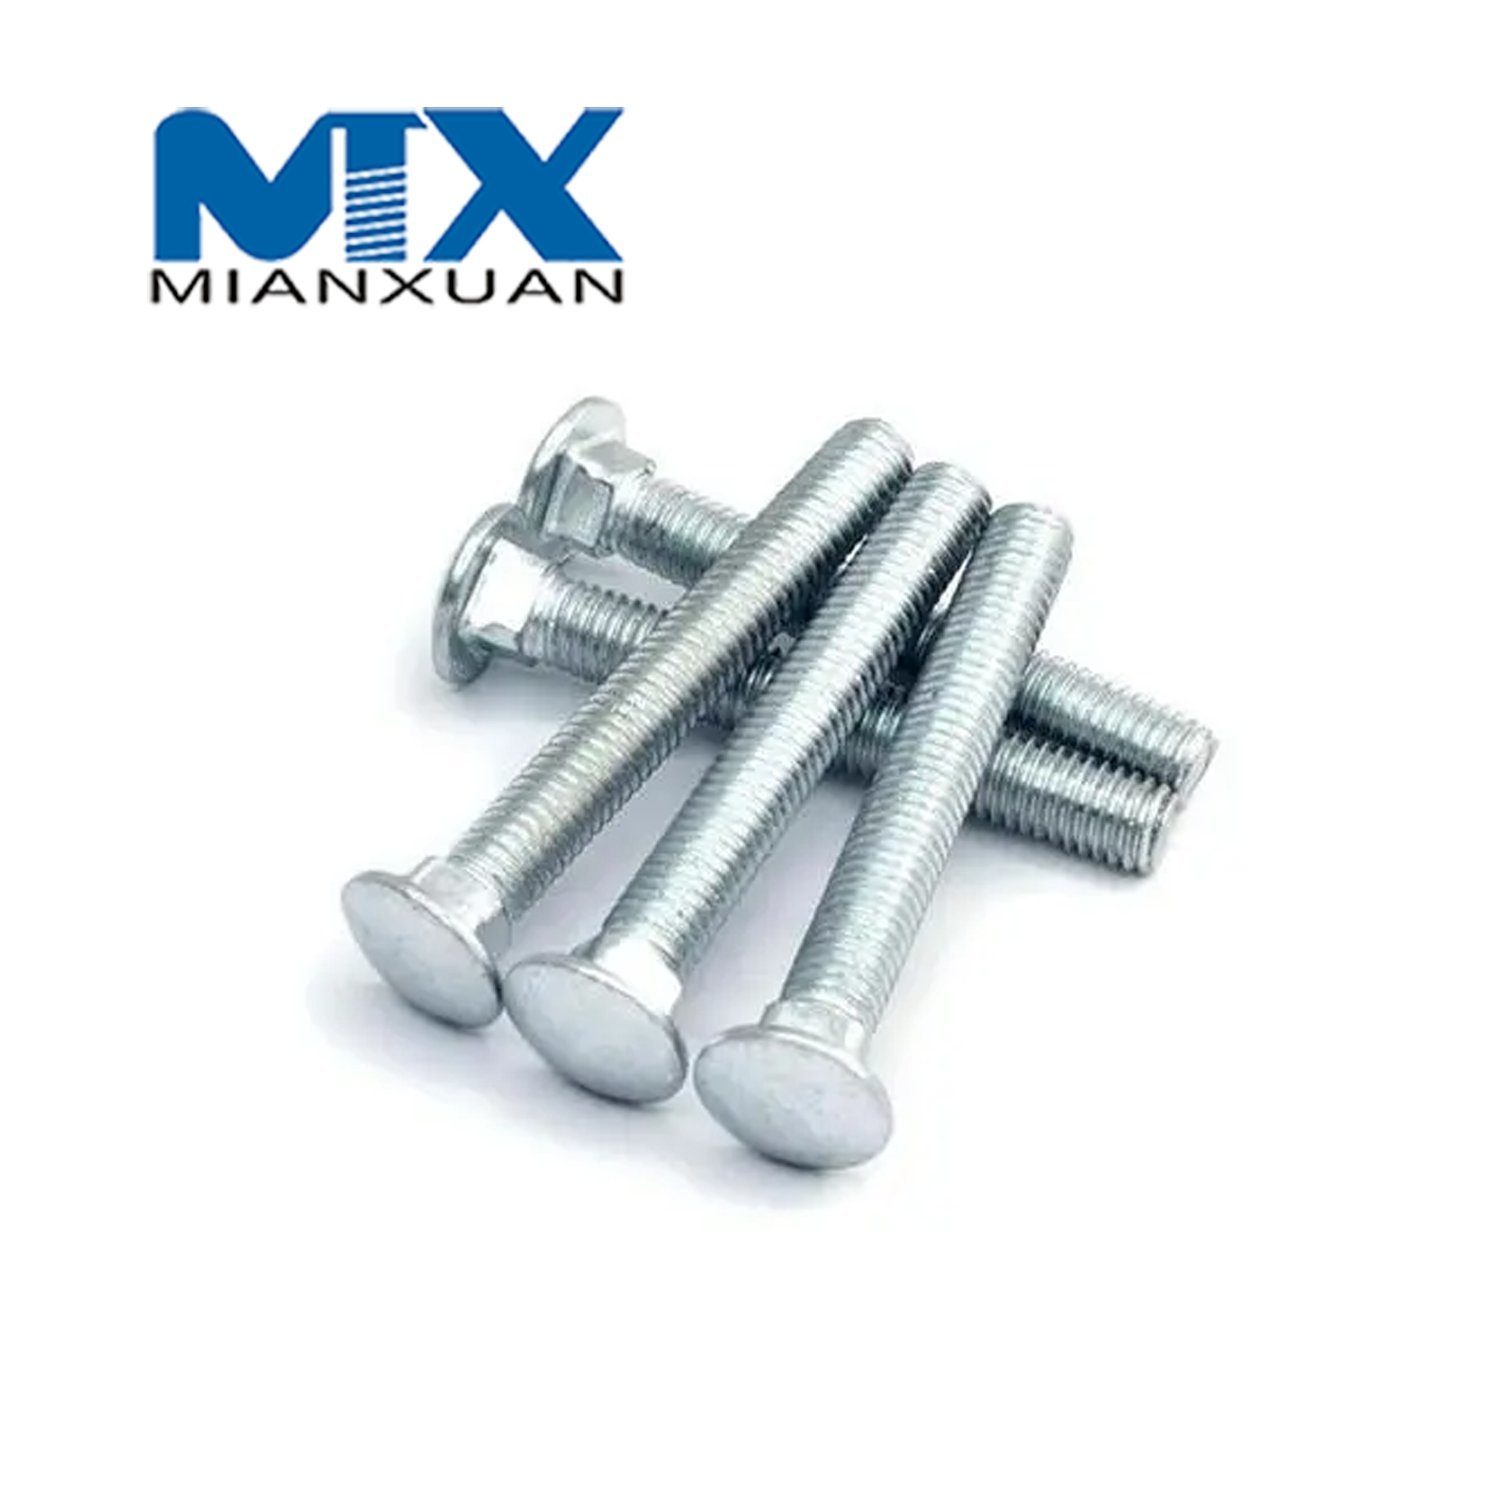 GB12 Carriage Bolt Stainless Steel